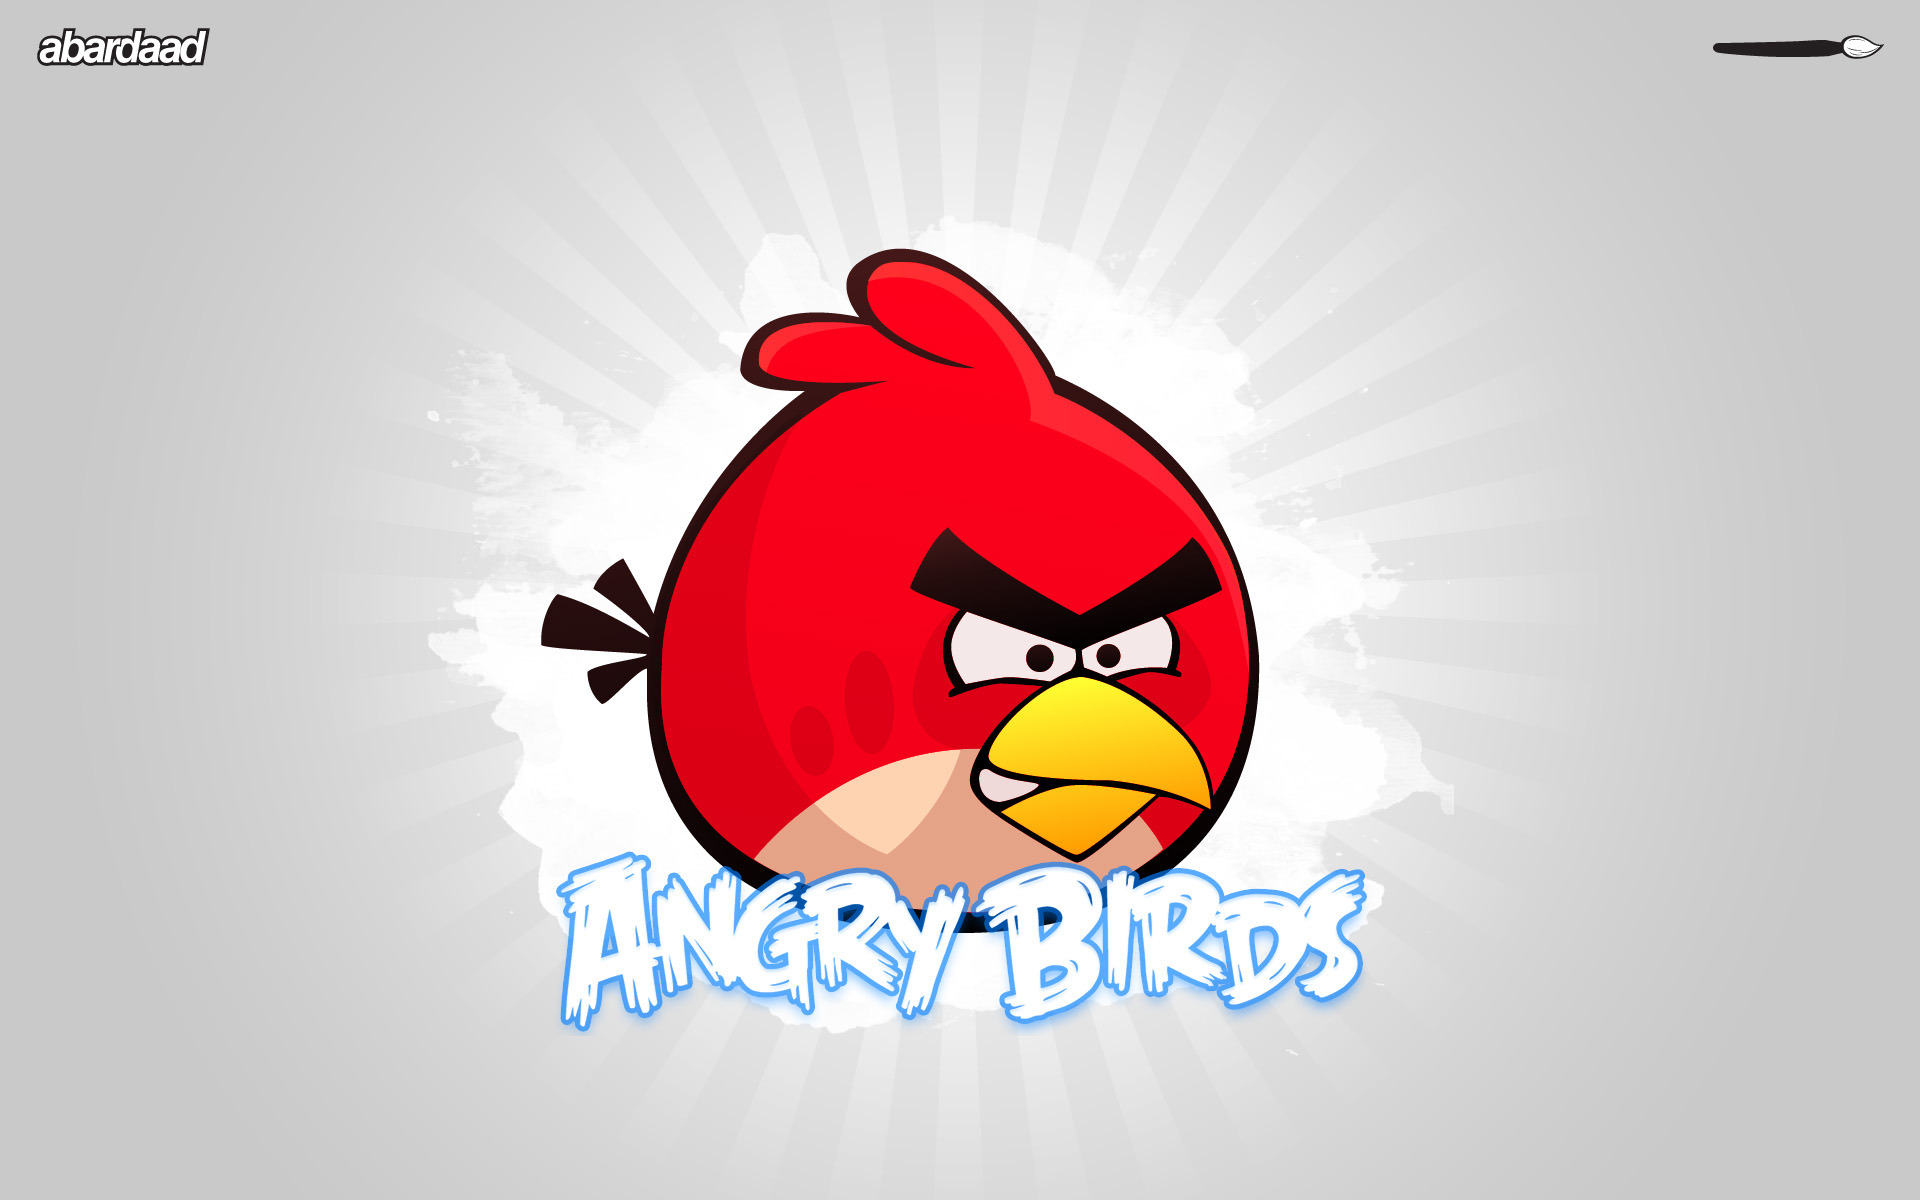 angry birds rio 2 movie hd wallpapers image hd wallpaper games photo